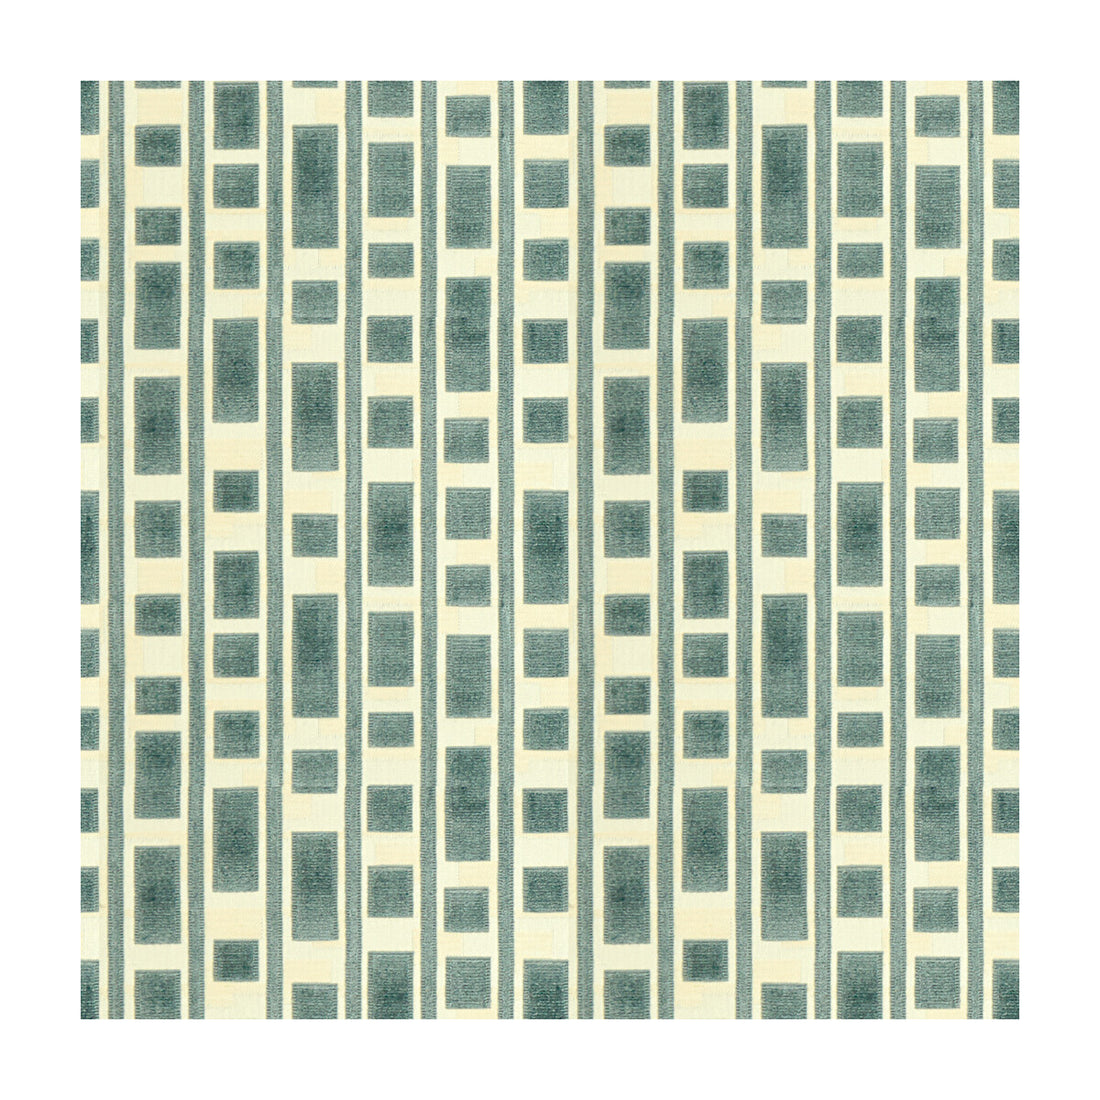 Resolution fabric in aqua color - pattern GWF-3514.13.0 - by Lee Jofa Modern in the Mary Fisher collection